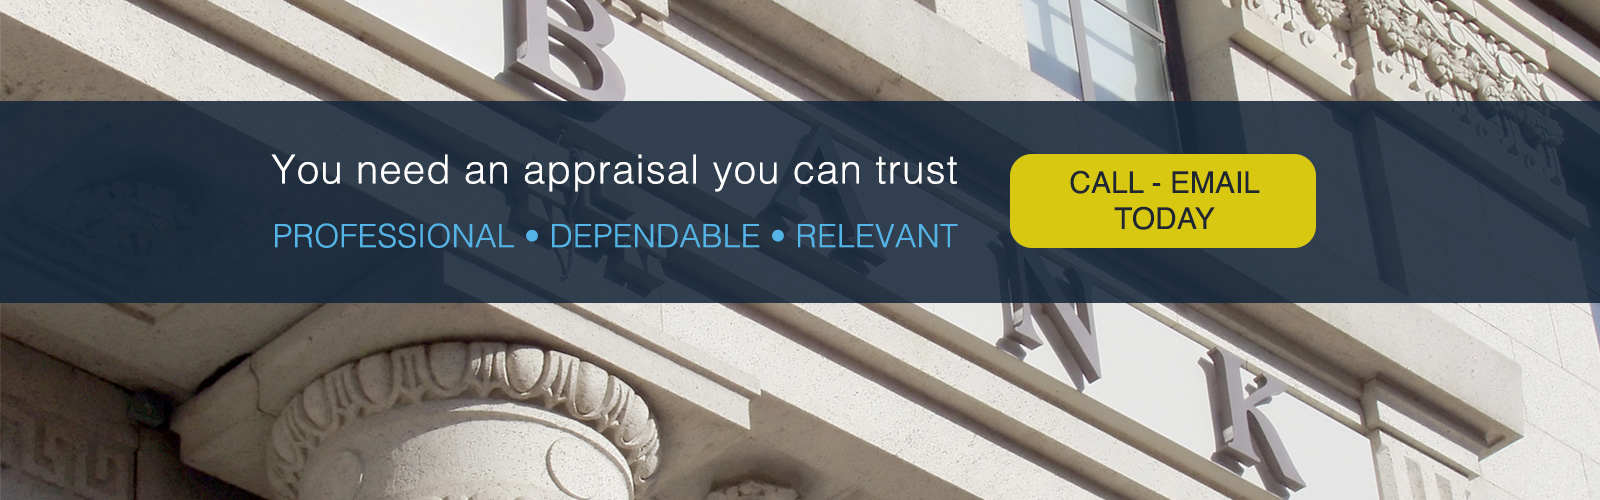 PROFESSIONAL • ACCURATE • DEPENDABLE appraisals